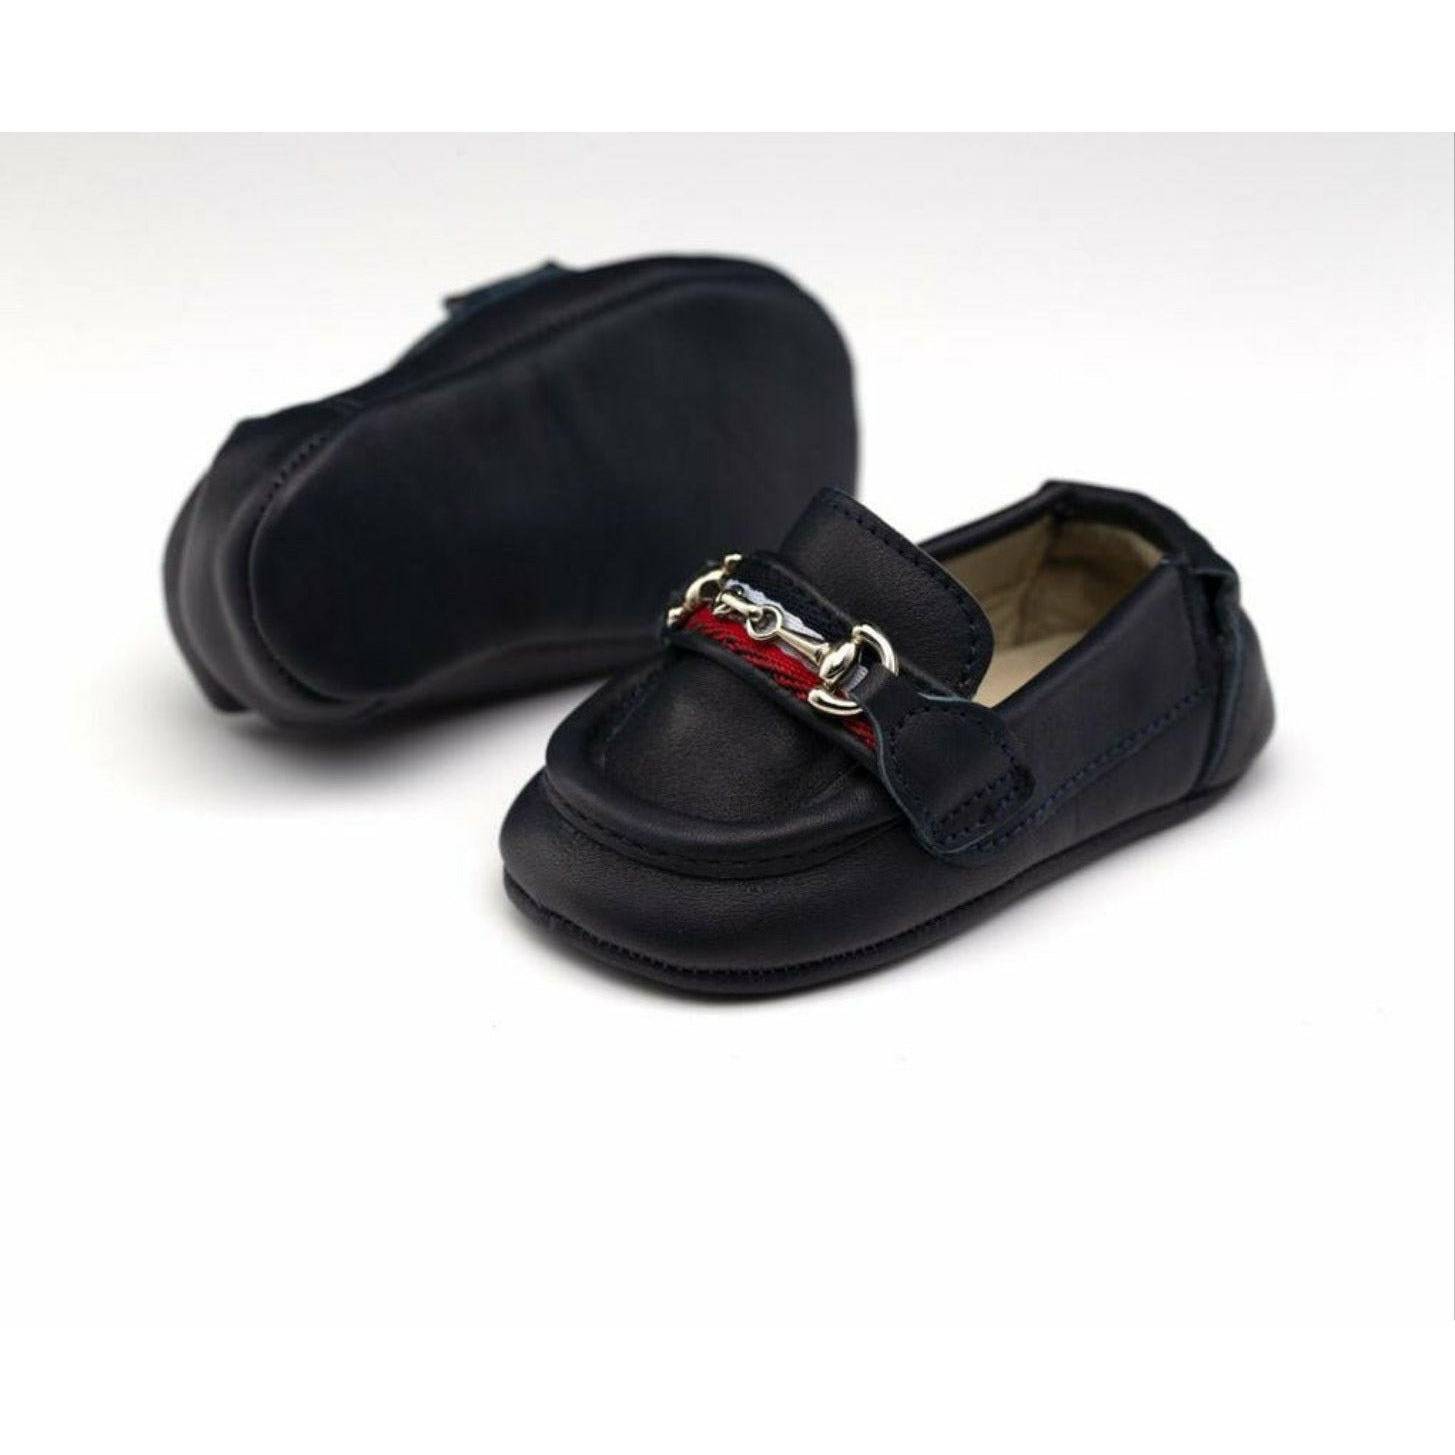 PICCOLETTO LOAFER SHOES - NAVY